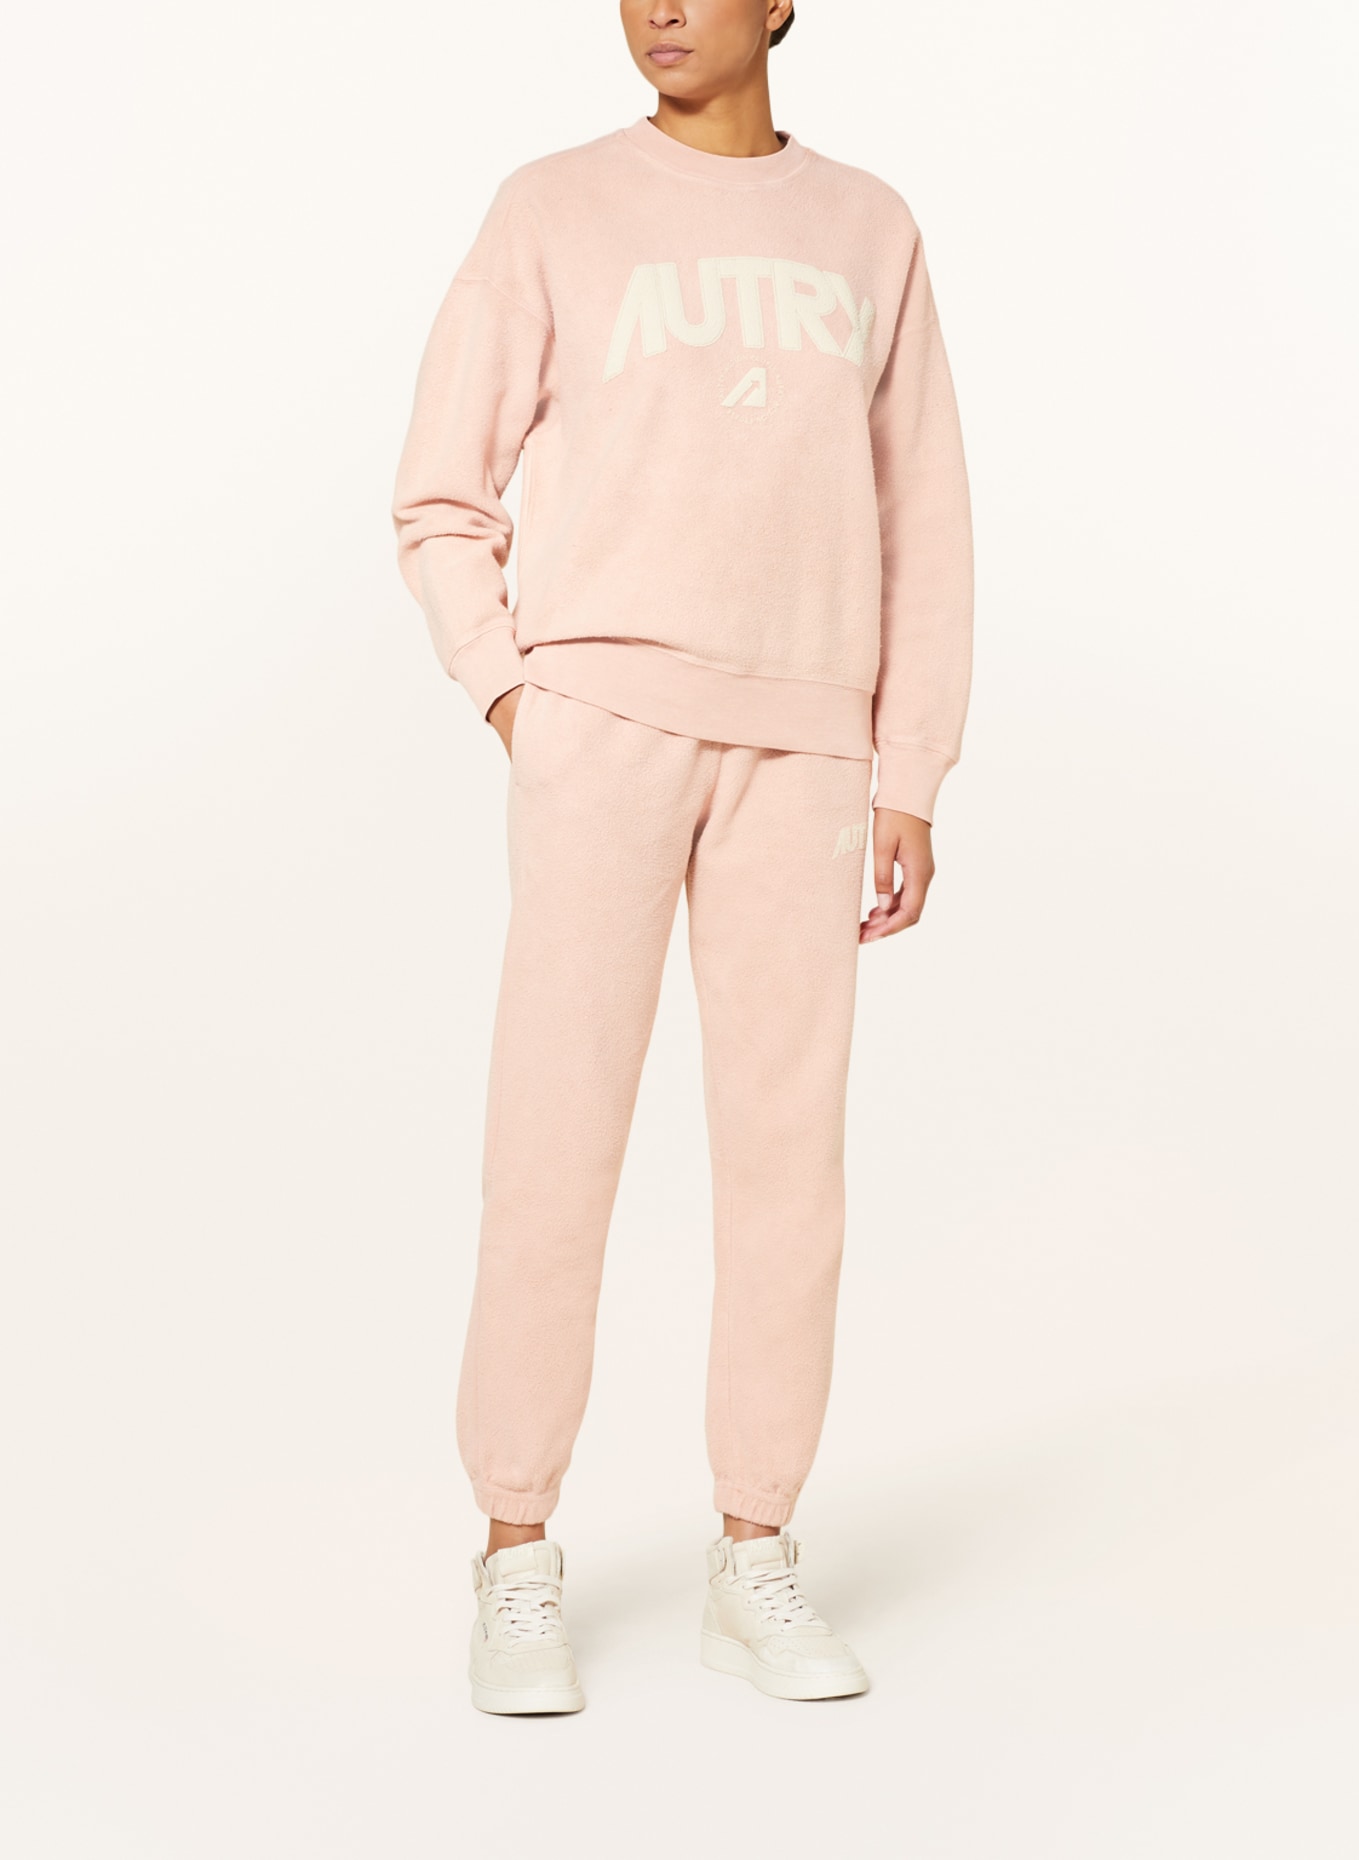 AUTRY Fleece pants AMOUR in jogger style, Color: ROSE (Image 2)